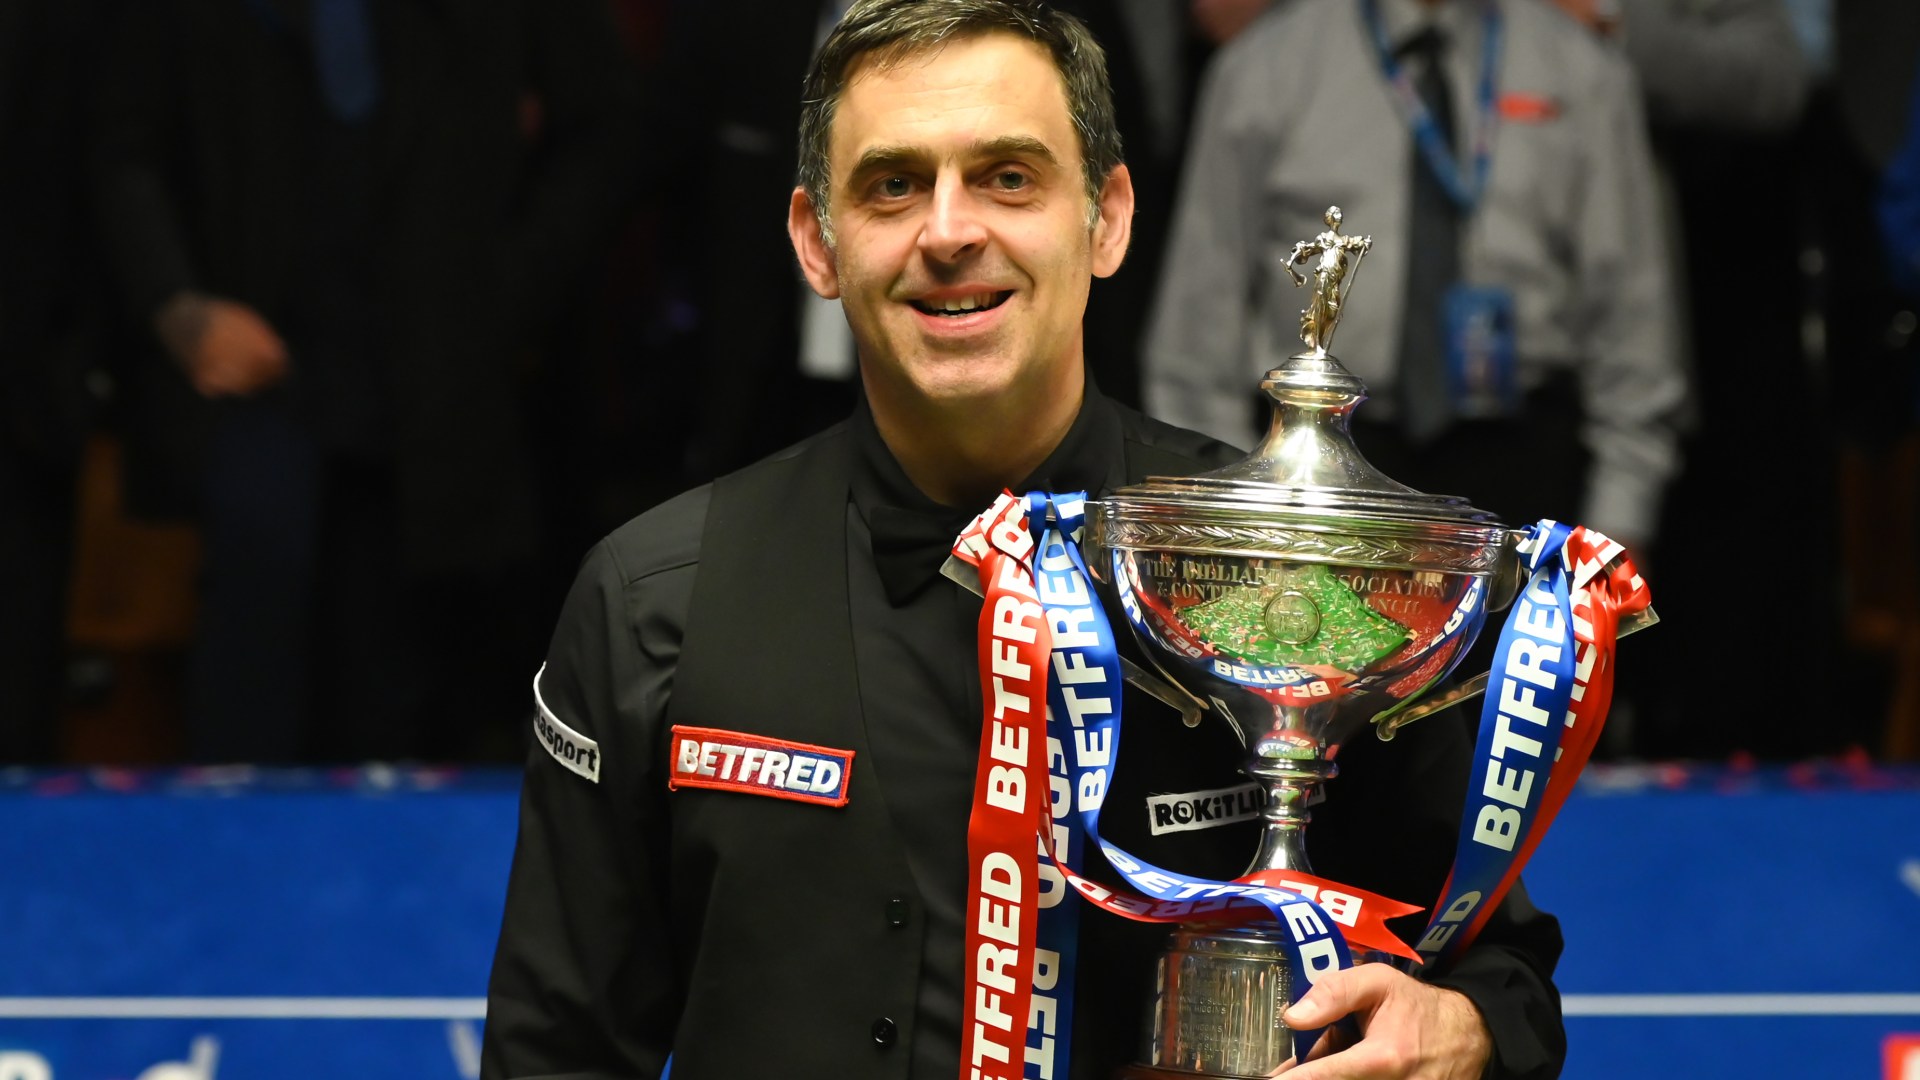 Ronnie O’Sullivan, 48, says ‘I’m NOT the greatest player ever’ as he reveals why he ranks TWO snooker legends as better [Video]